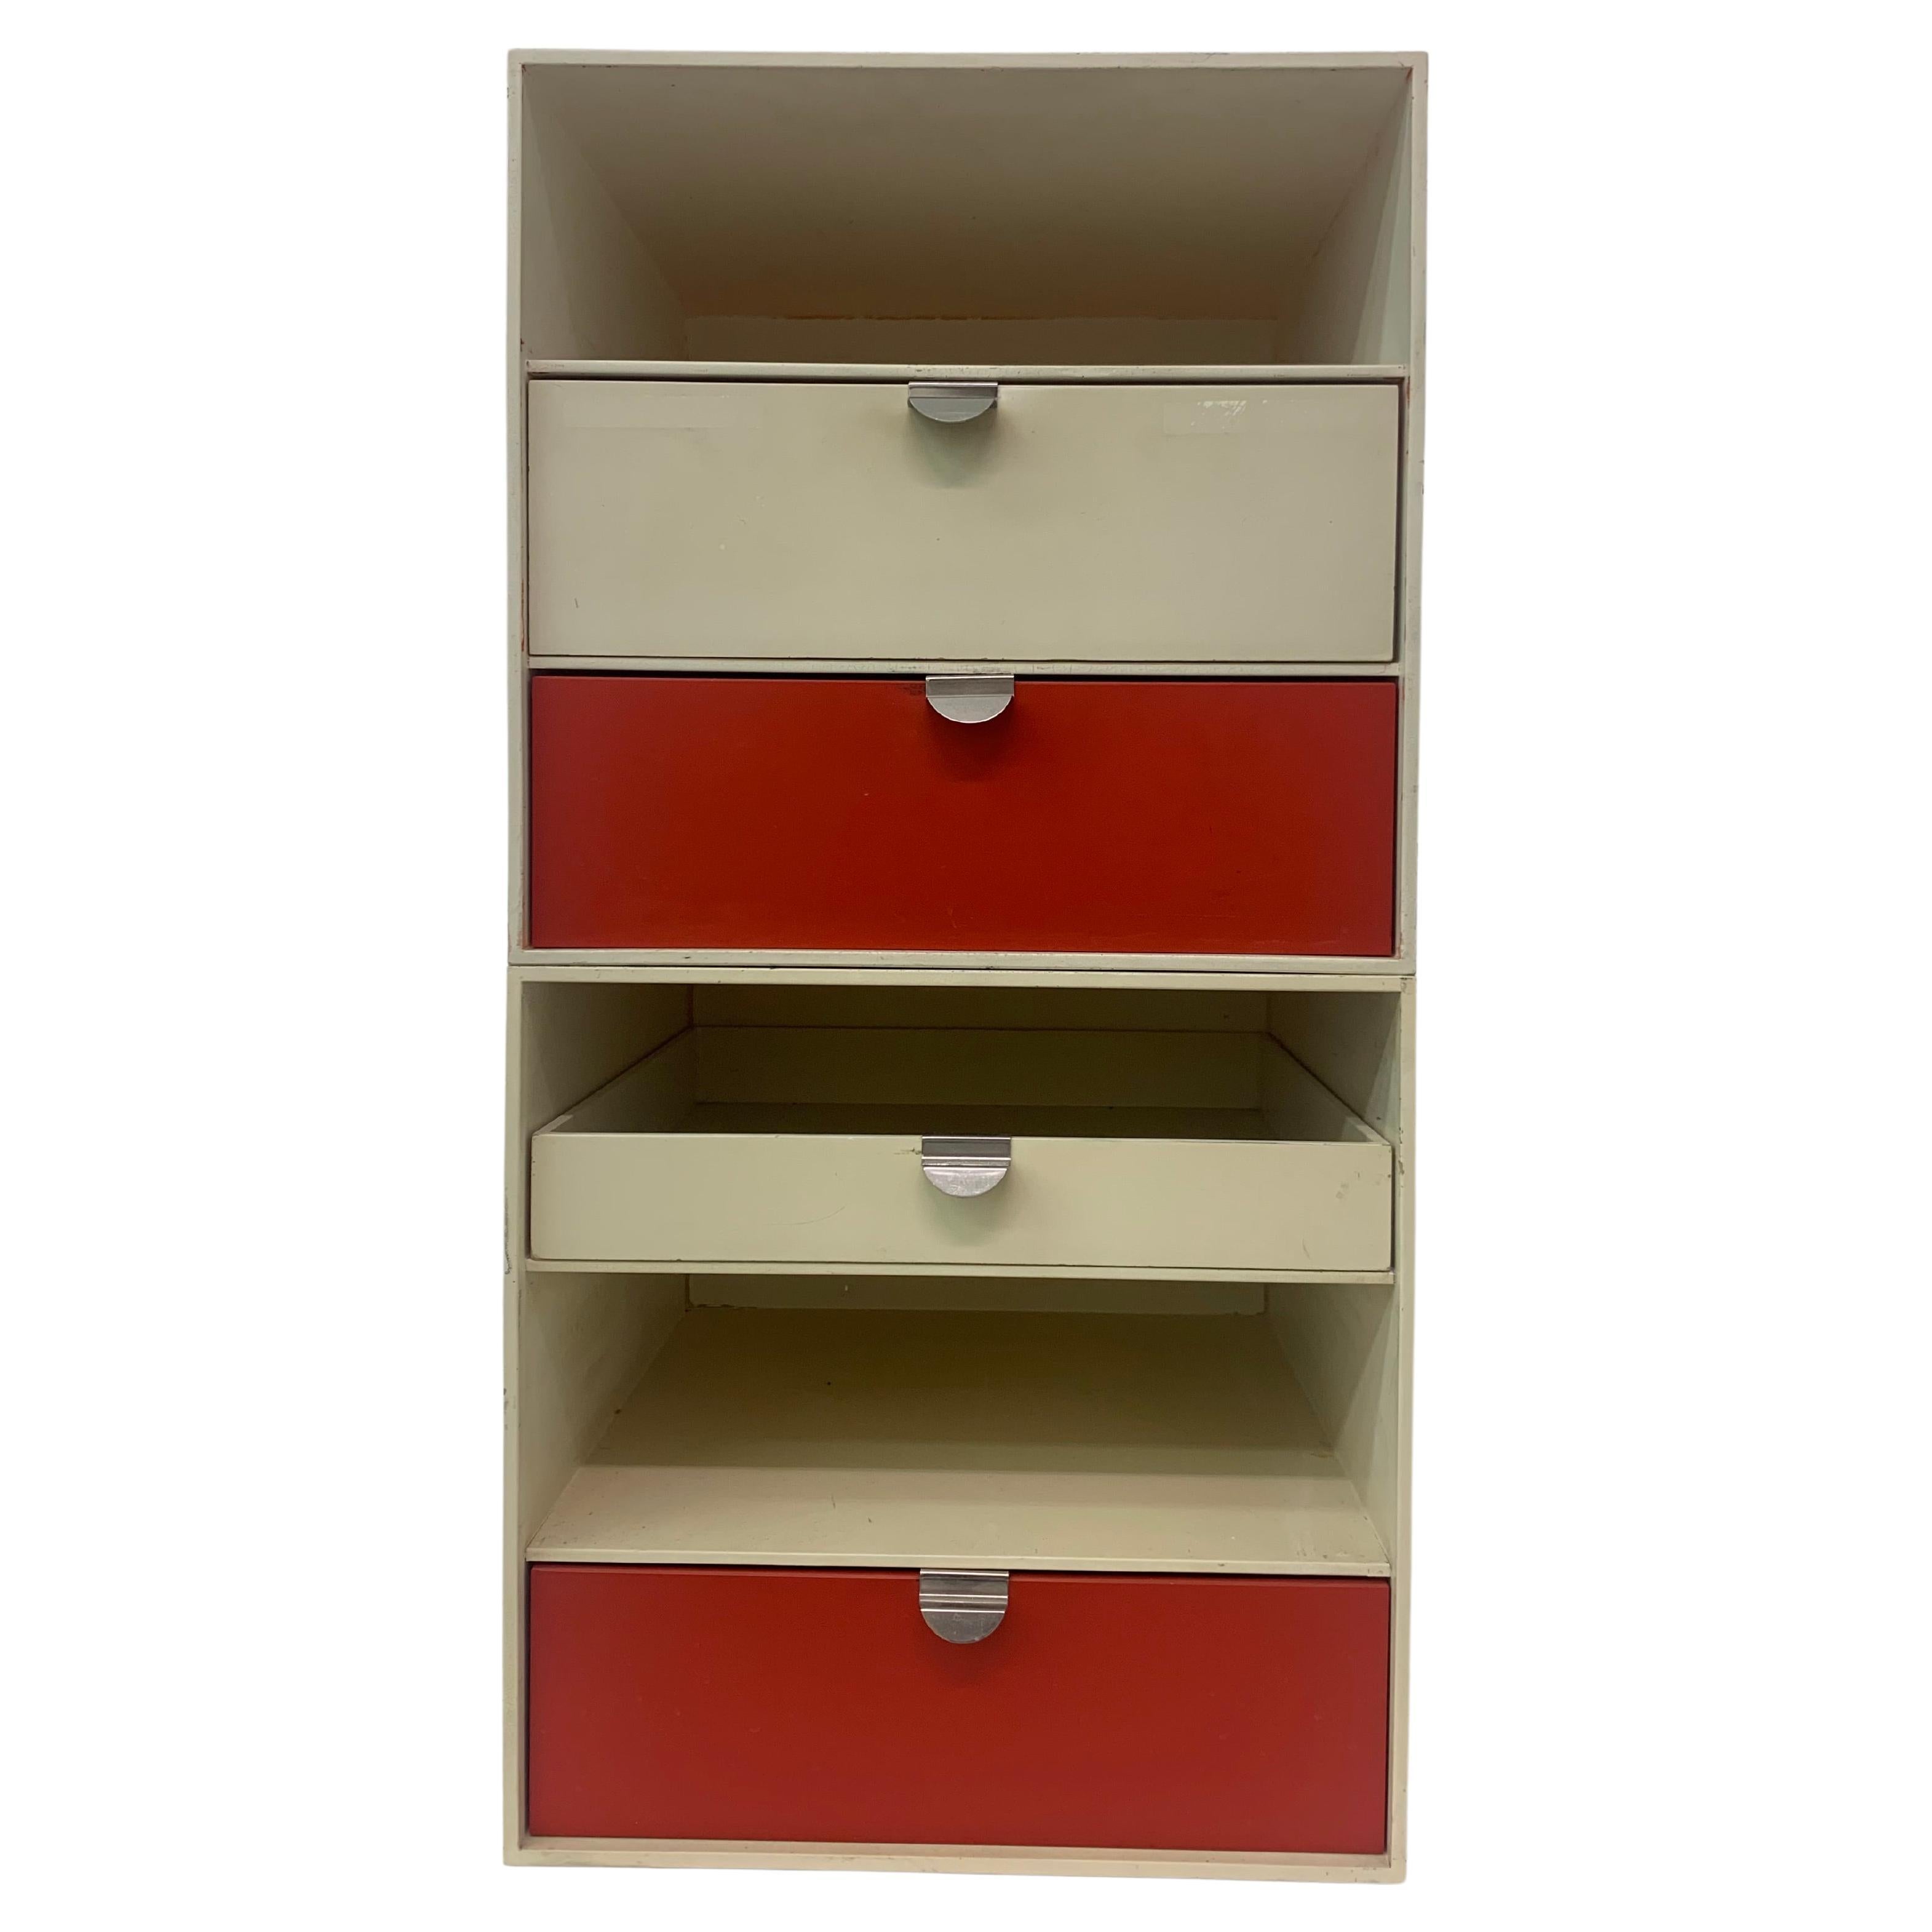 Palaset Stackable Box by Ristomatti Ratia for Treston Oy Finland, 1970s For Sale